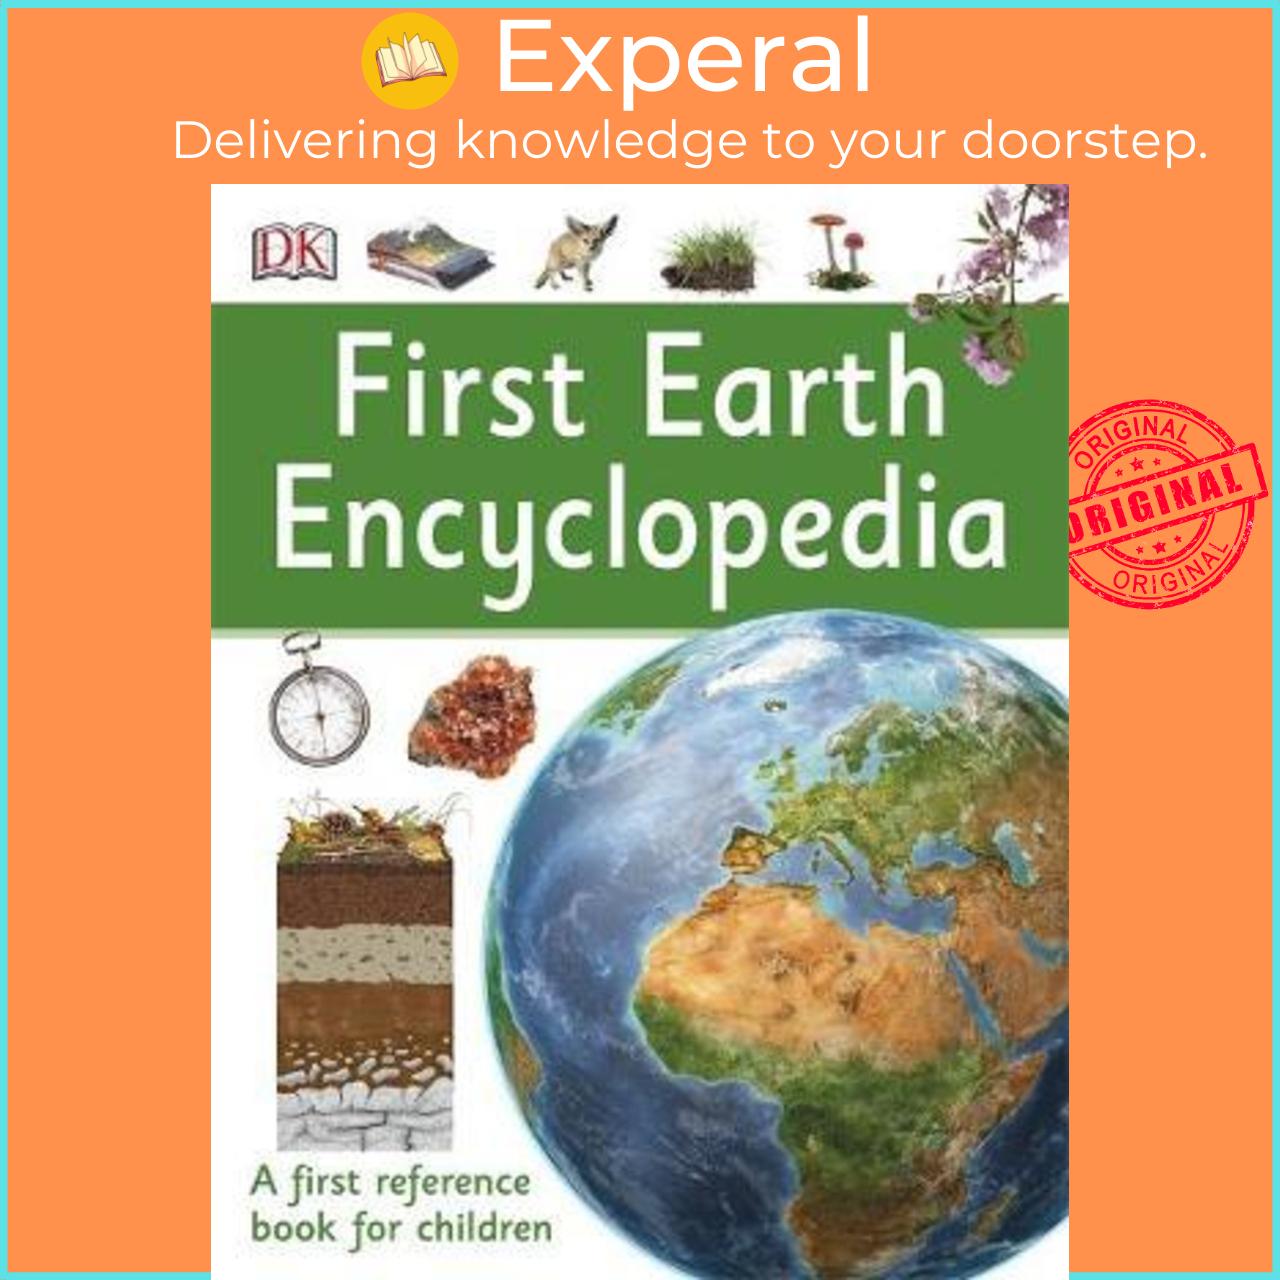 Sách - First Earth Encyclopedia : A first reference book for children by DK (UK edition, paperback)